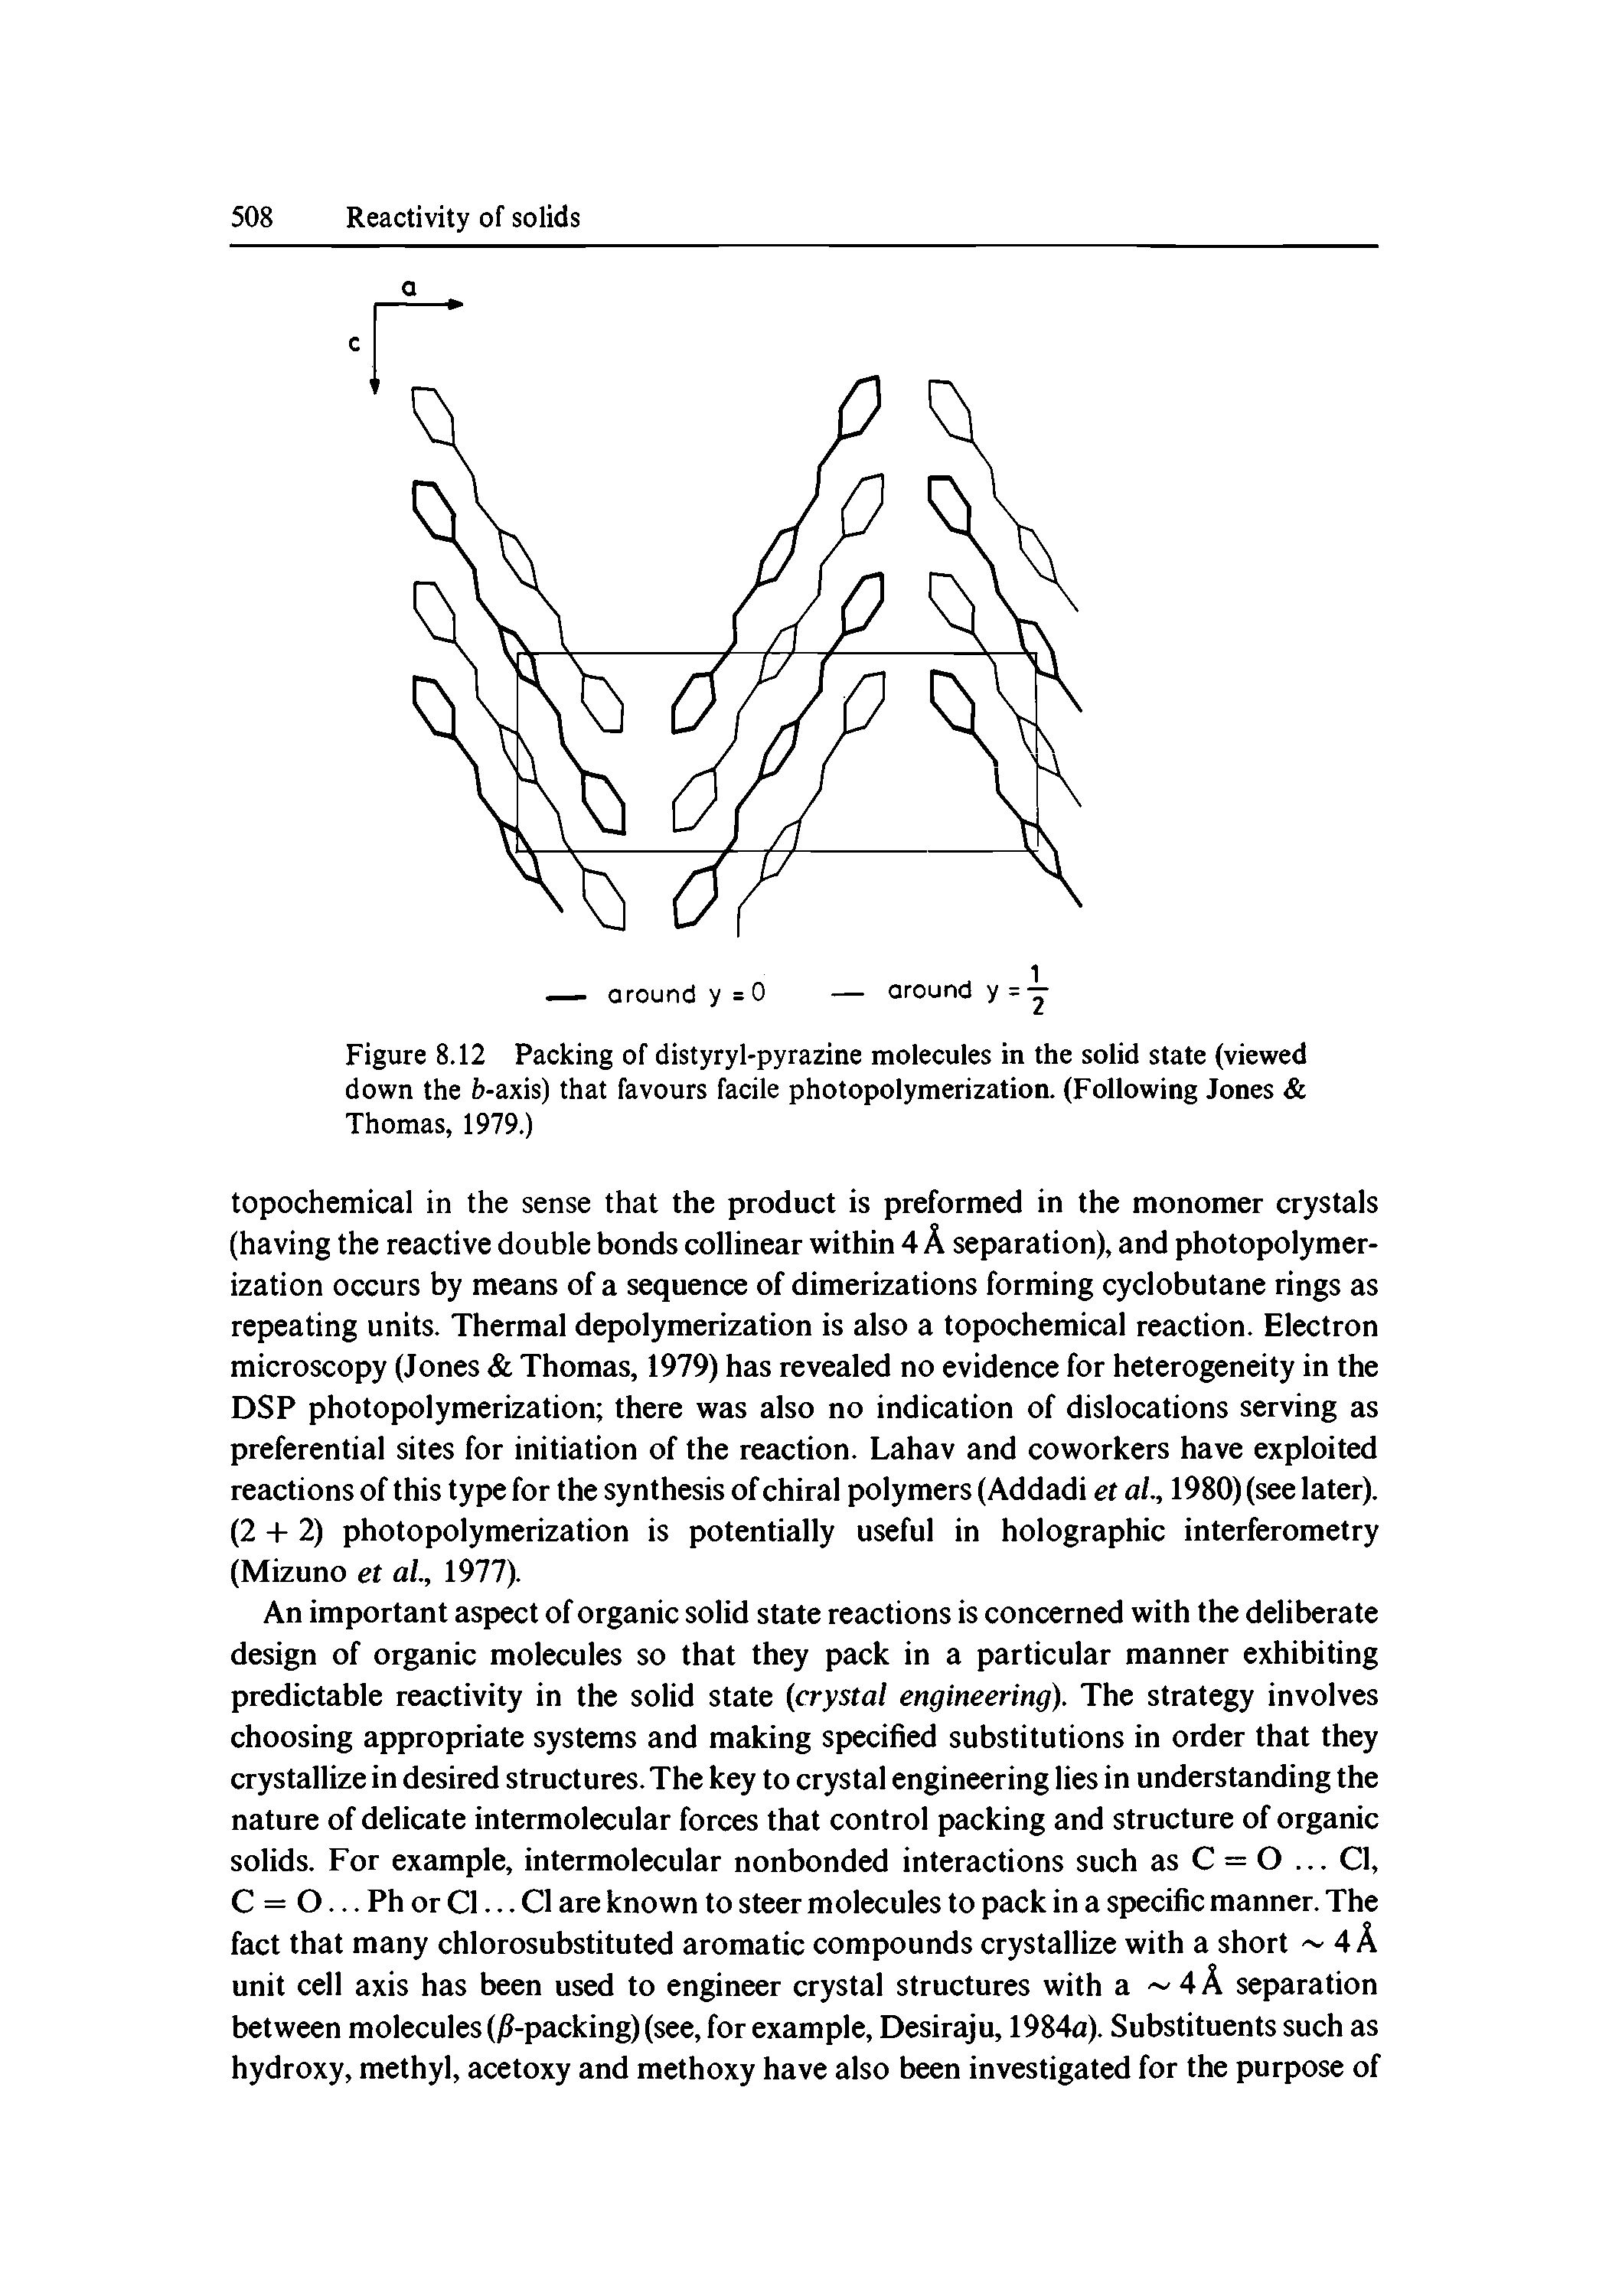 Figure 8.12 Packing of distyryl-pyrazine molecules in the solid state (viewed down the h-axis) that favours facile photopolymerization. (Following Jones Thomas, 1979.)...